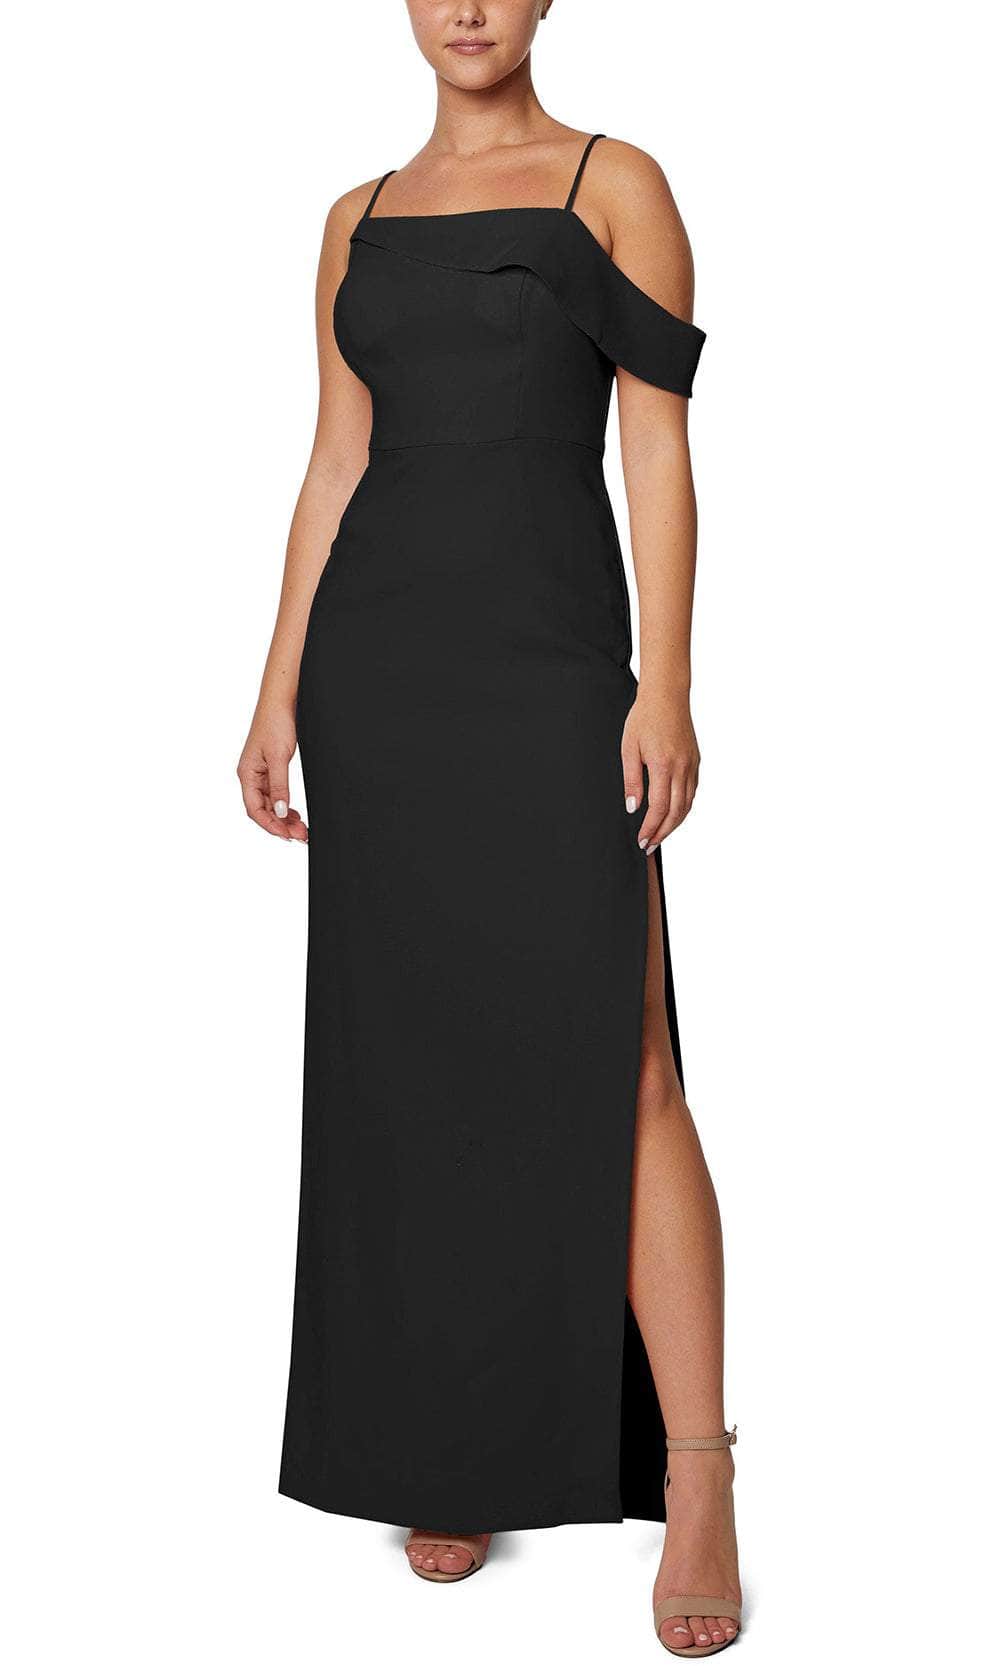 Laundry, Laundry HQ07W94 - Spaghetti Strap Crepe Evening Gown